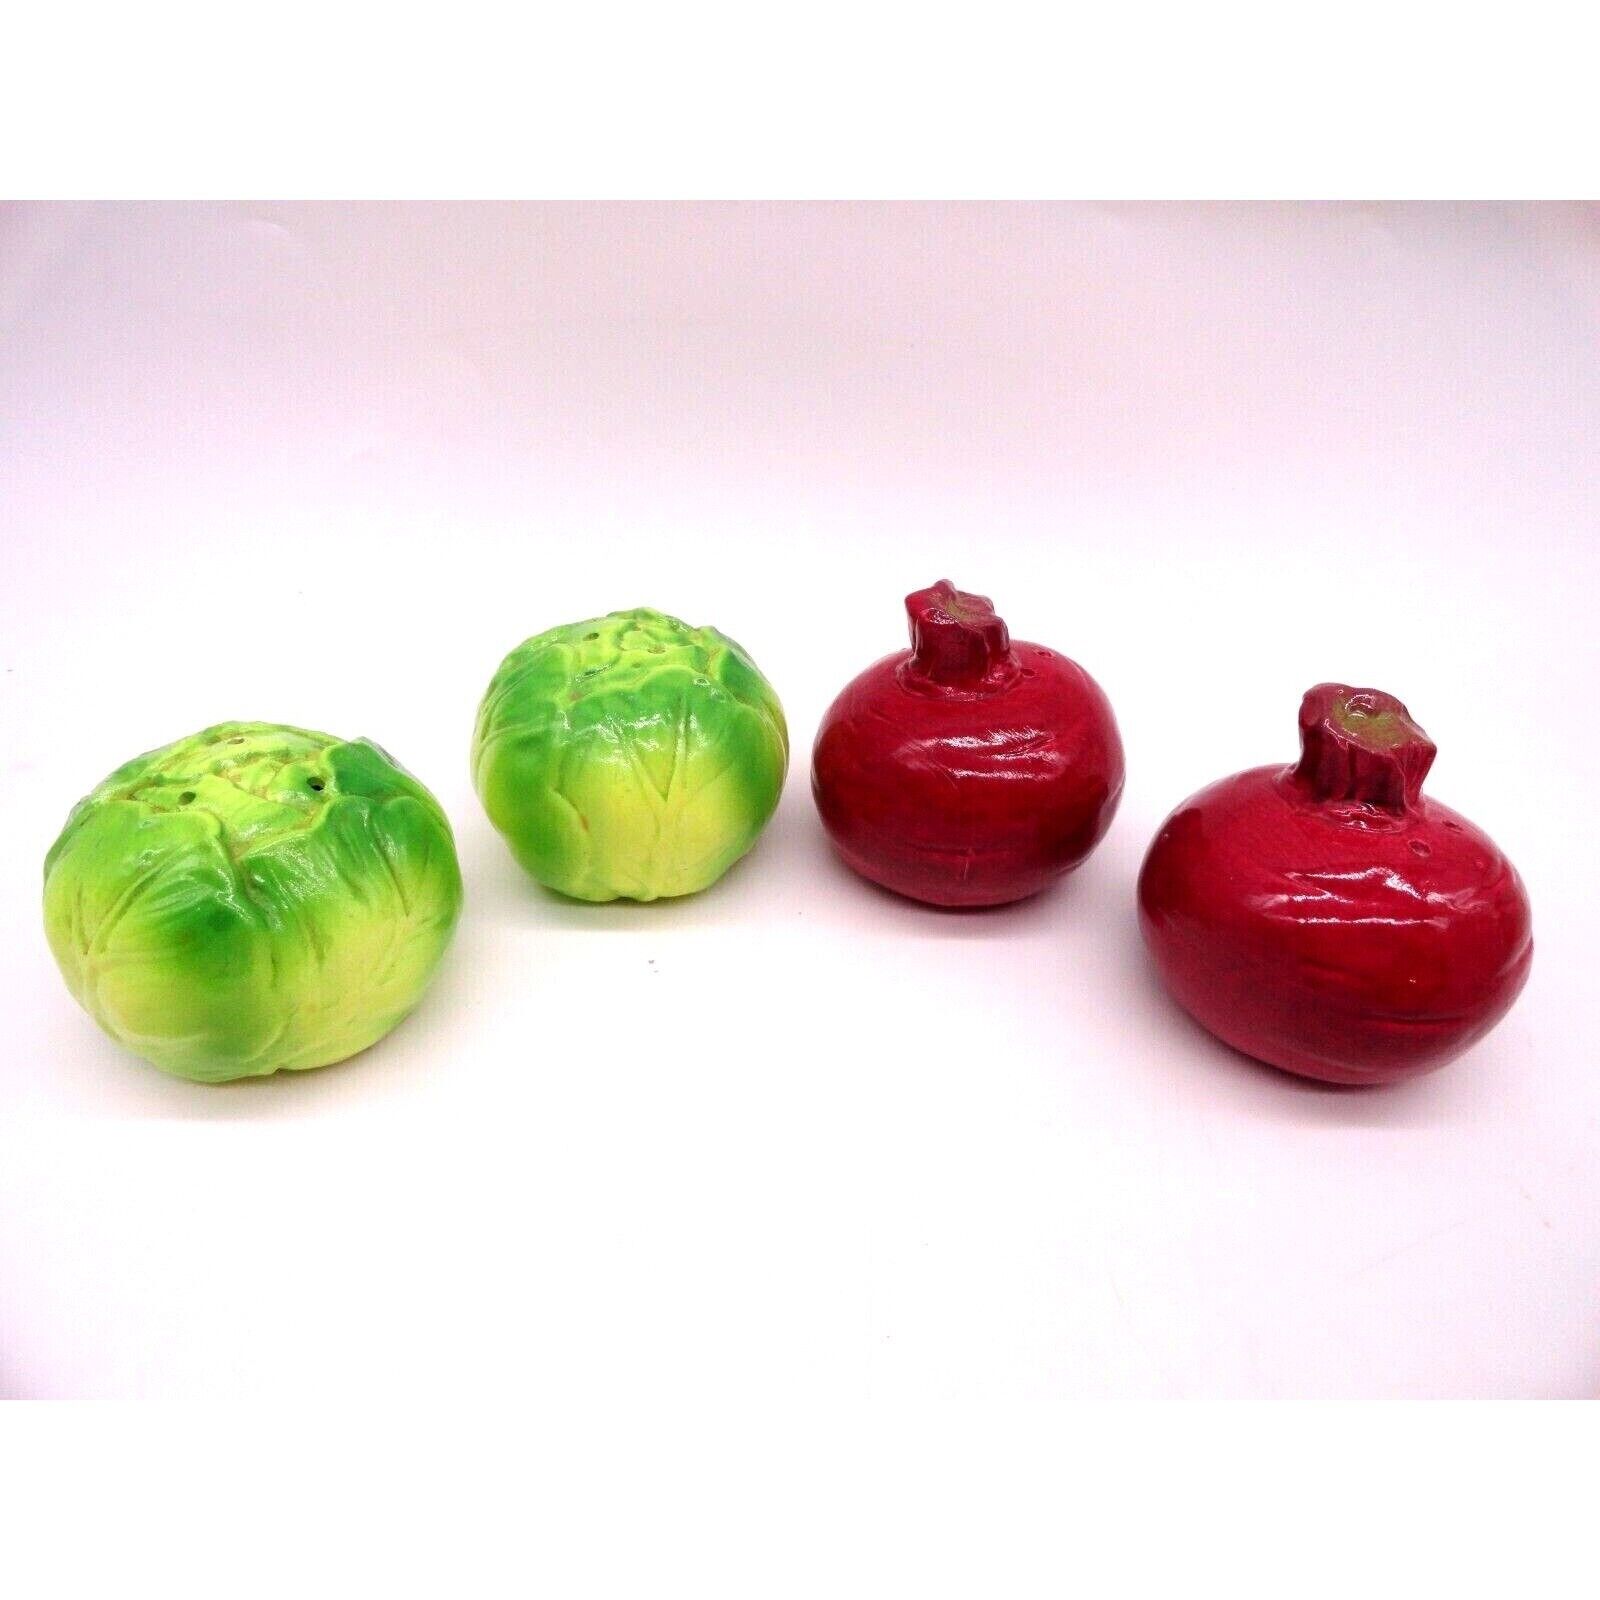 Vintage mid 1970's Enesco Heads of Cabbage/Beets Salt and Pepper Shakers